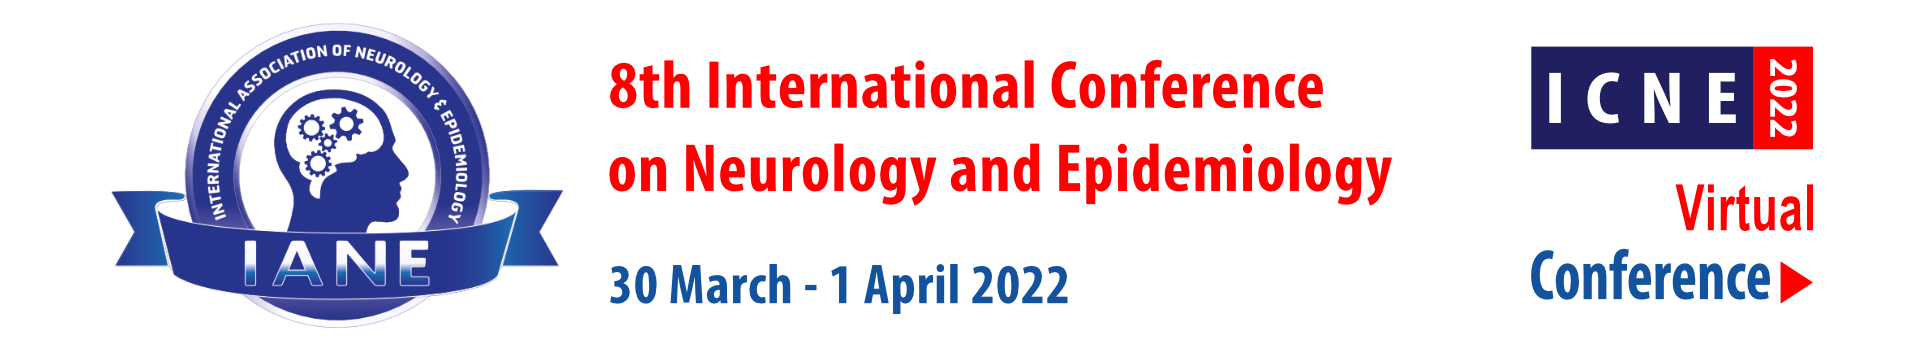 8th International Conference on Neurology and Epidemiology 2022 - virtual edition